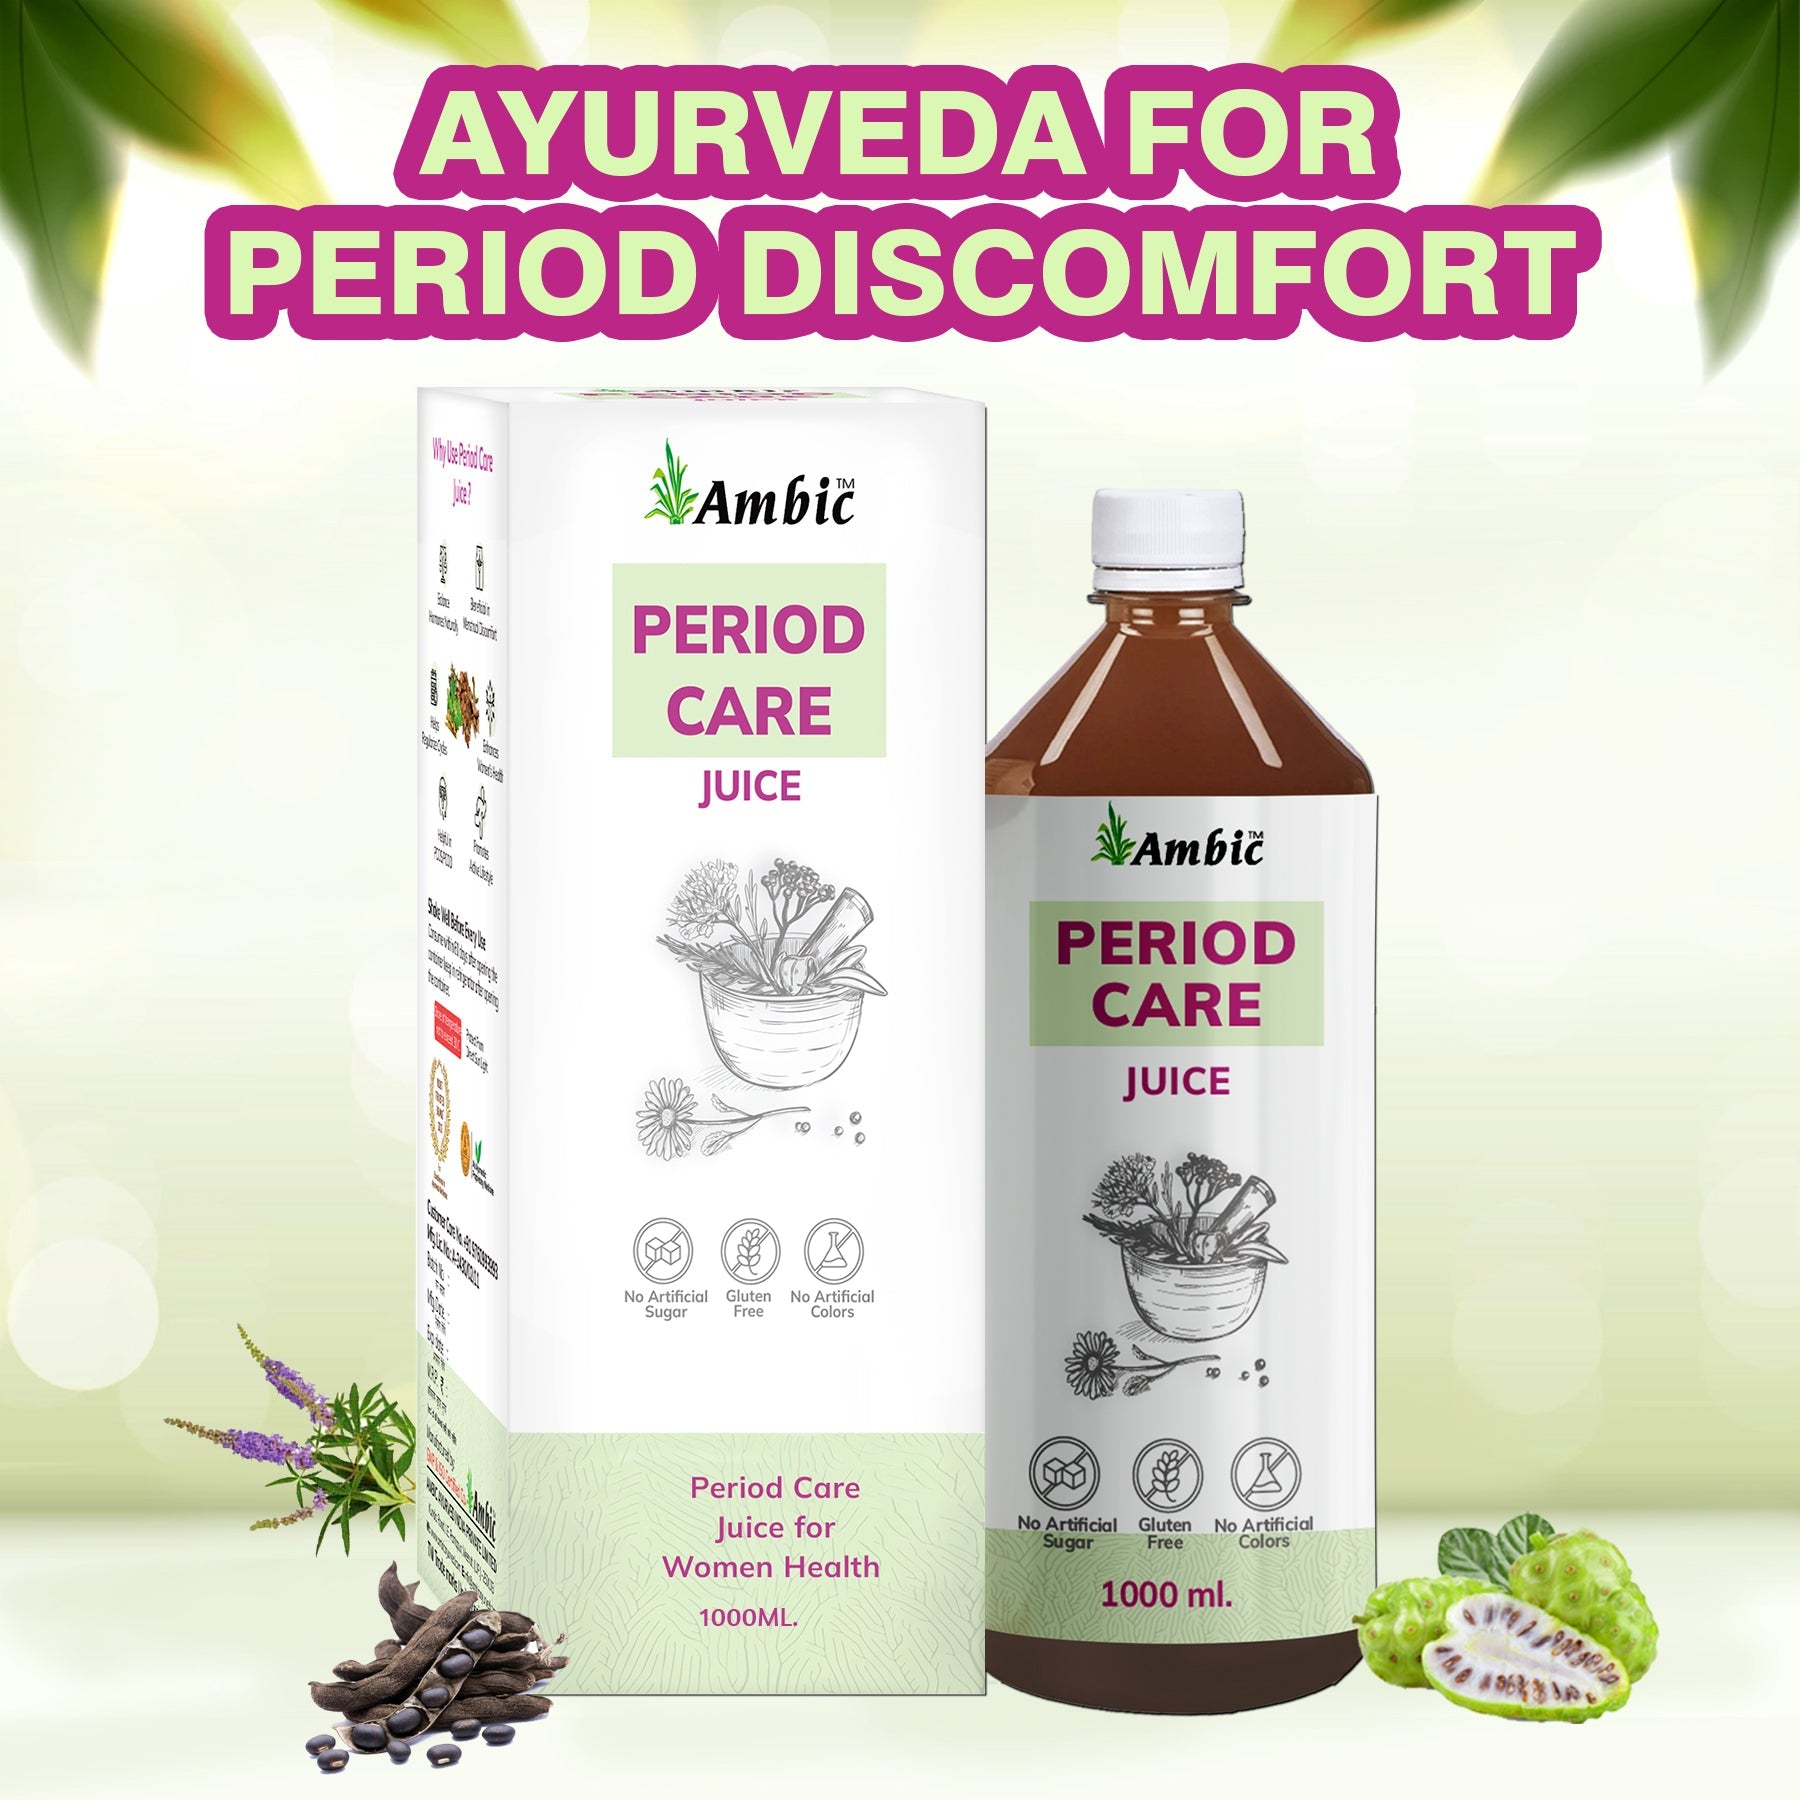 AMBIC Period Care Juice for Delayed Irregular Periods I Helps with Period Pain, PCOS, PCOD